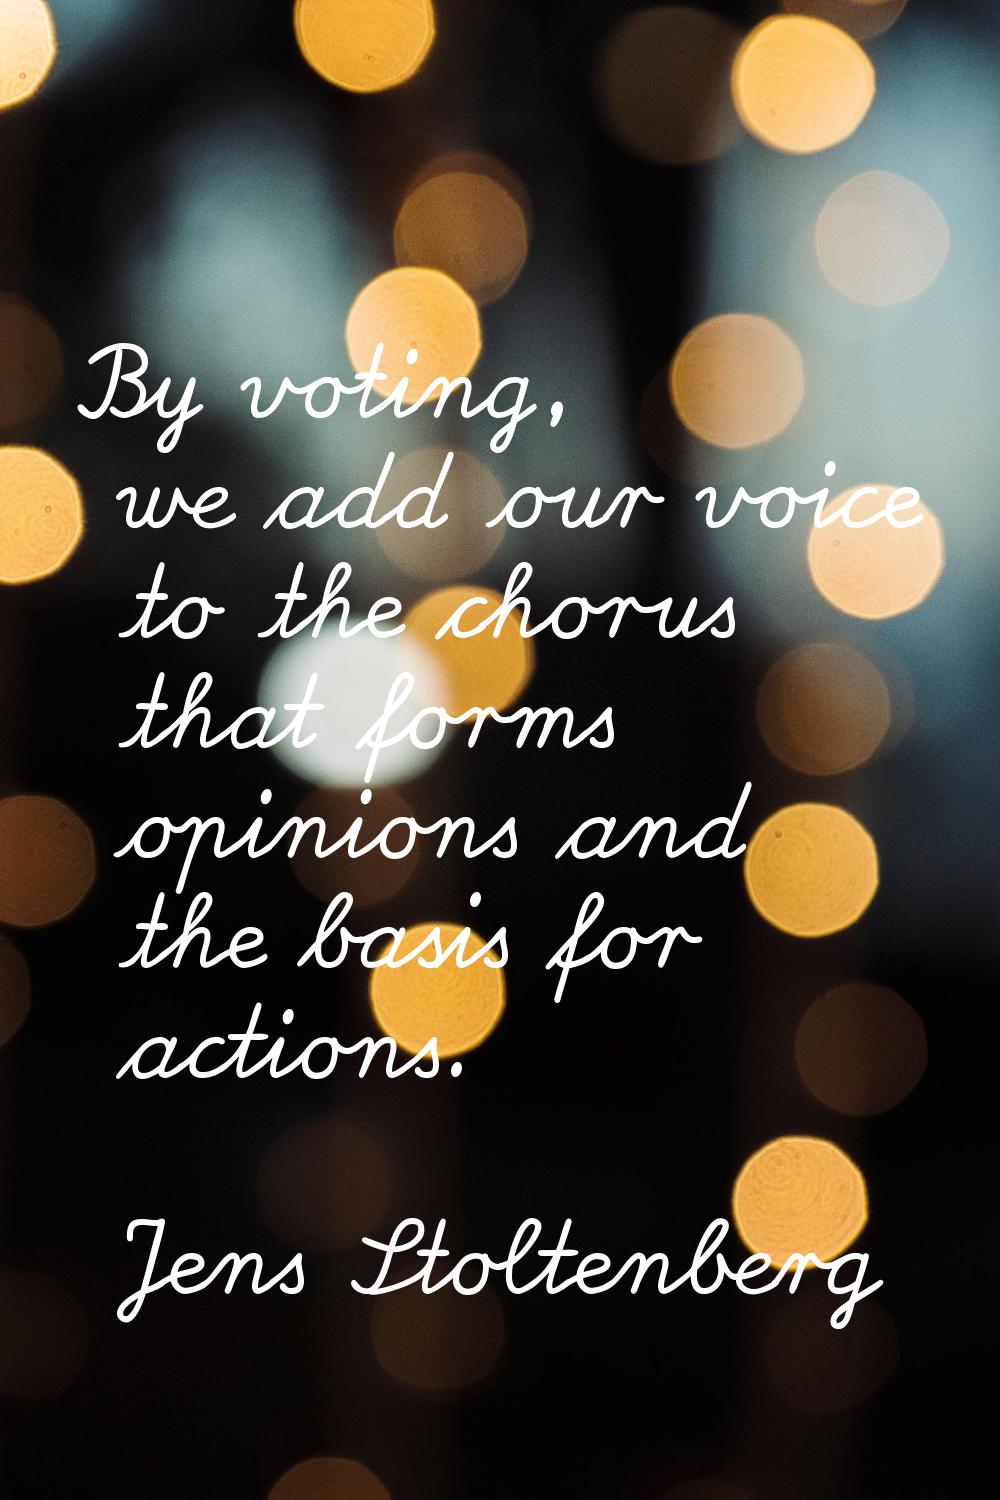 By voting, we add our voice to the chorus that forms opinions and the basis for actions.